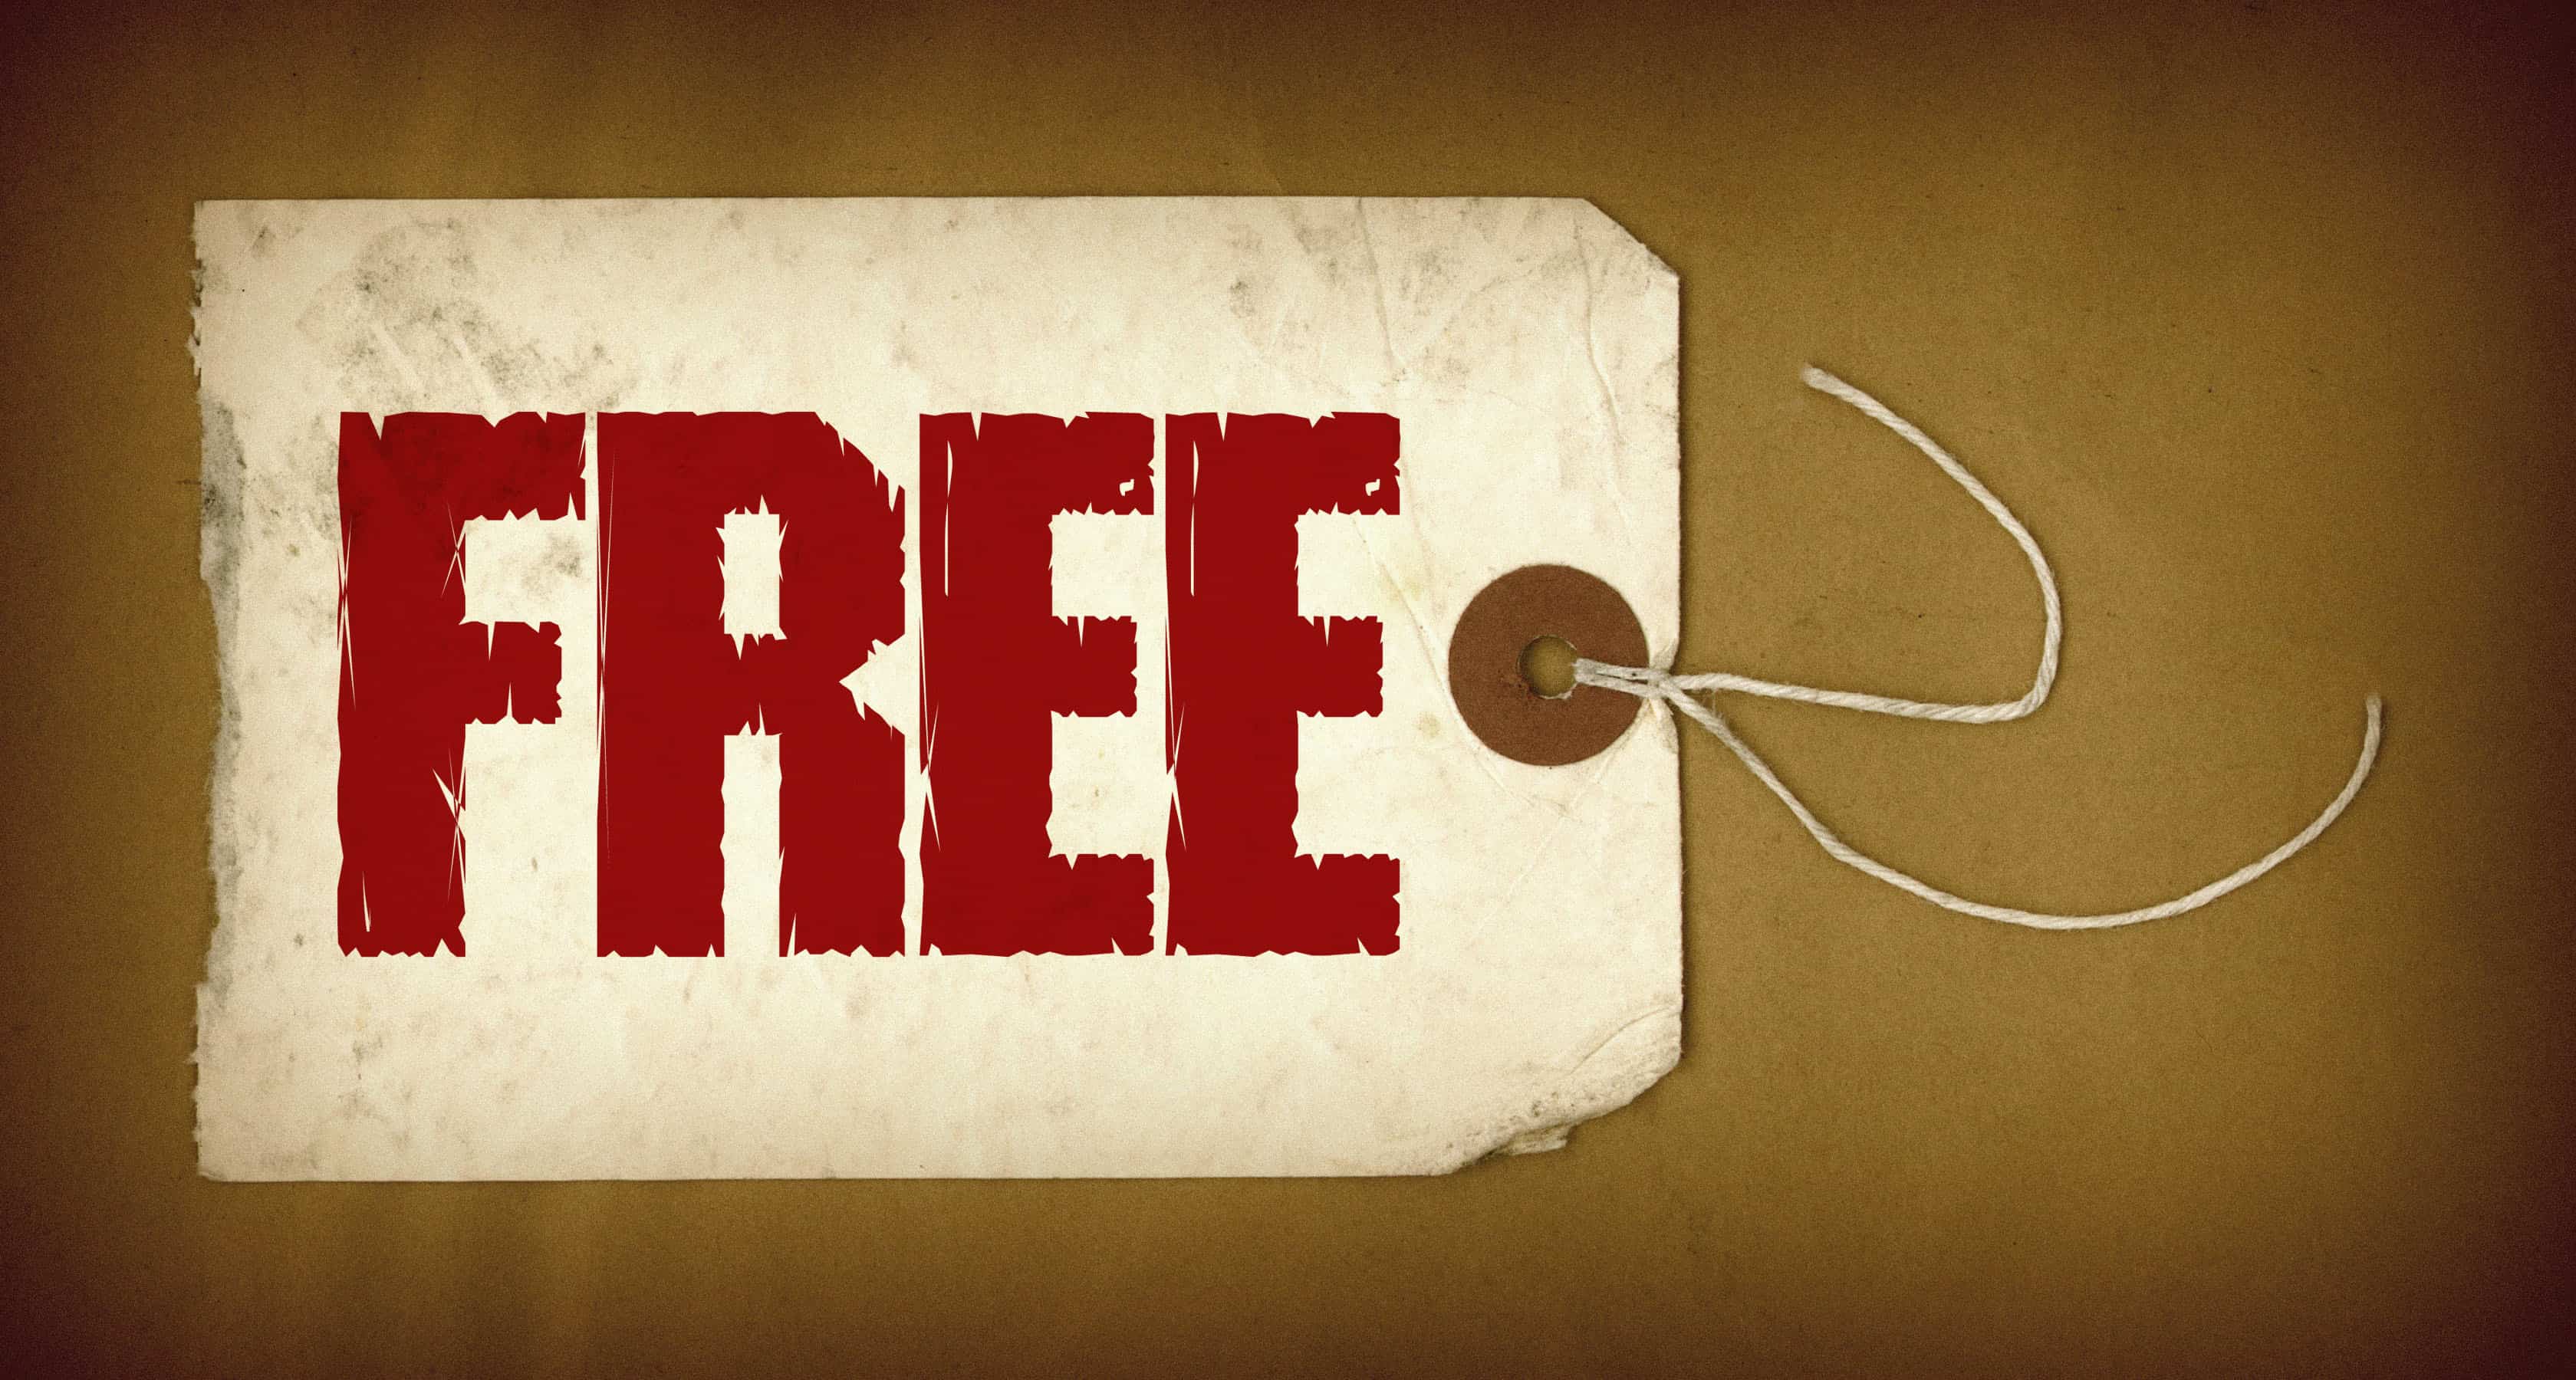 Great Free SEO Tools…Did We Mention FREE!